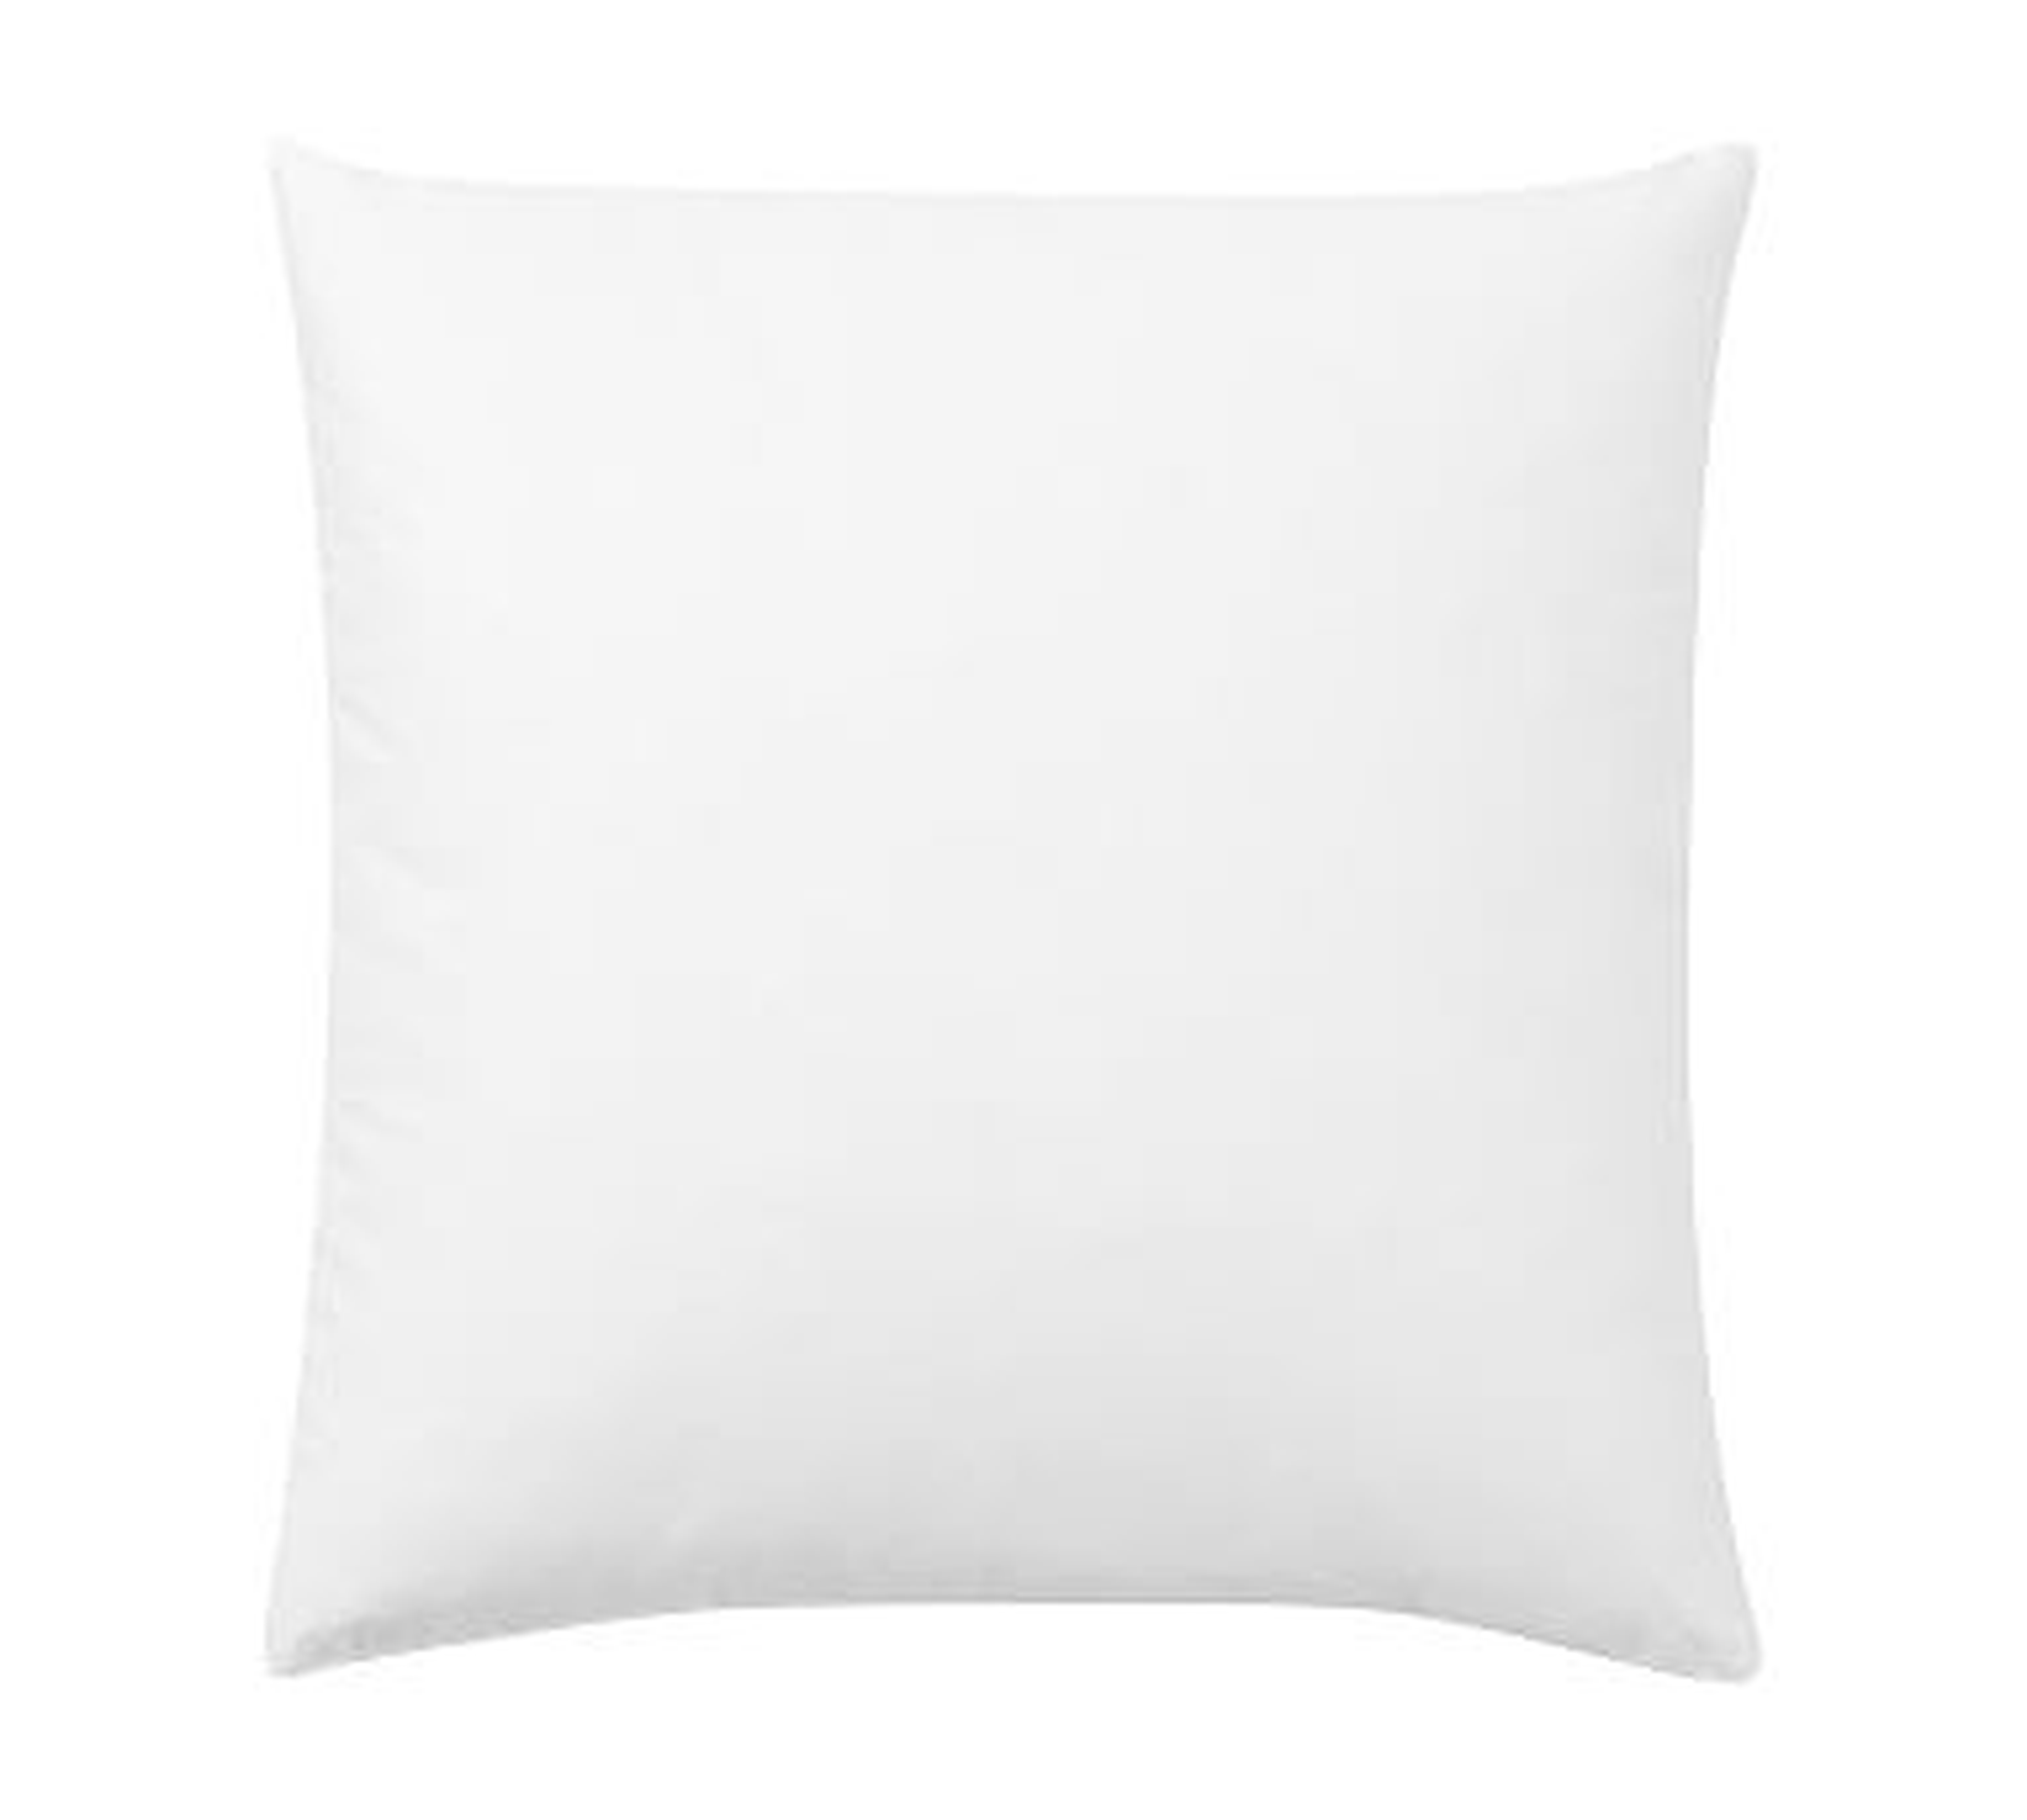 Feather Down Pillow Insert, 18" sq. - Pottery Barn